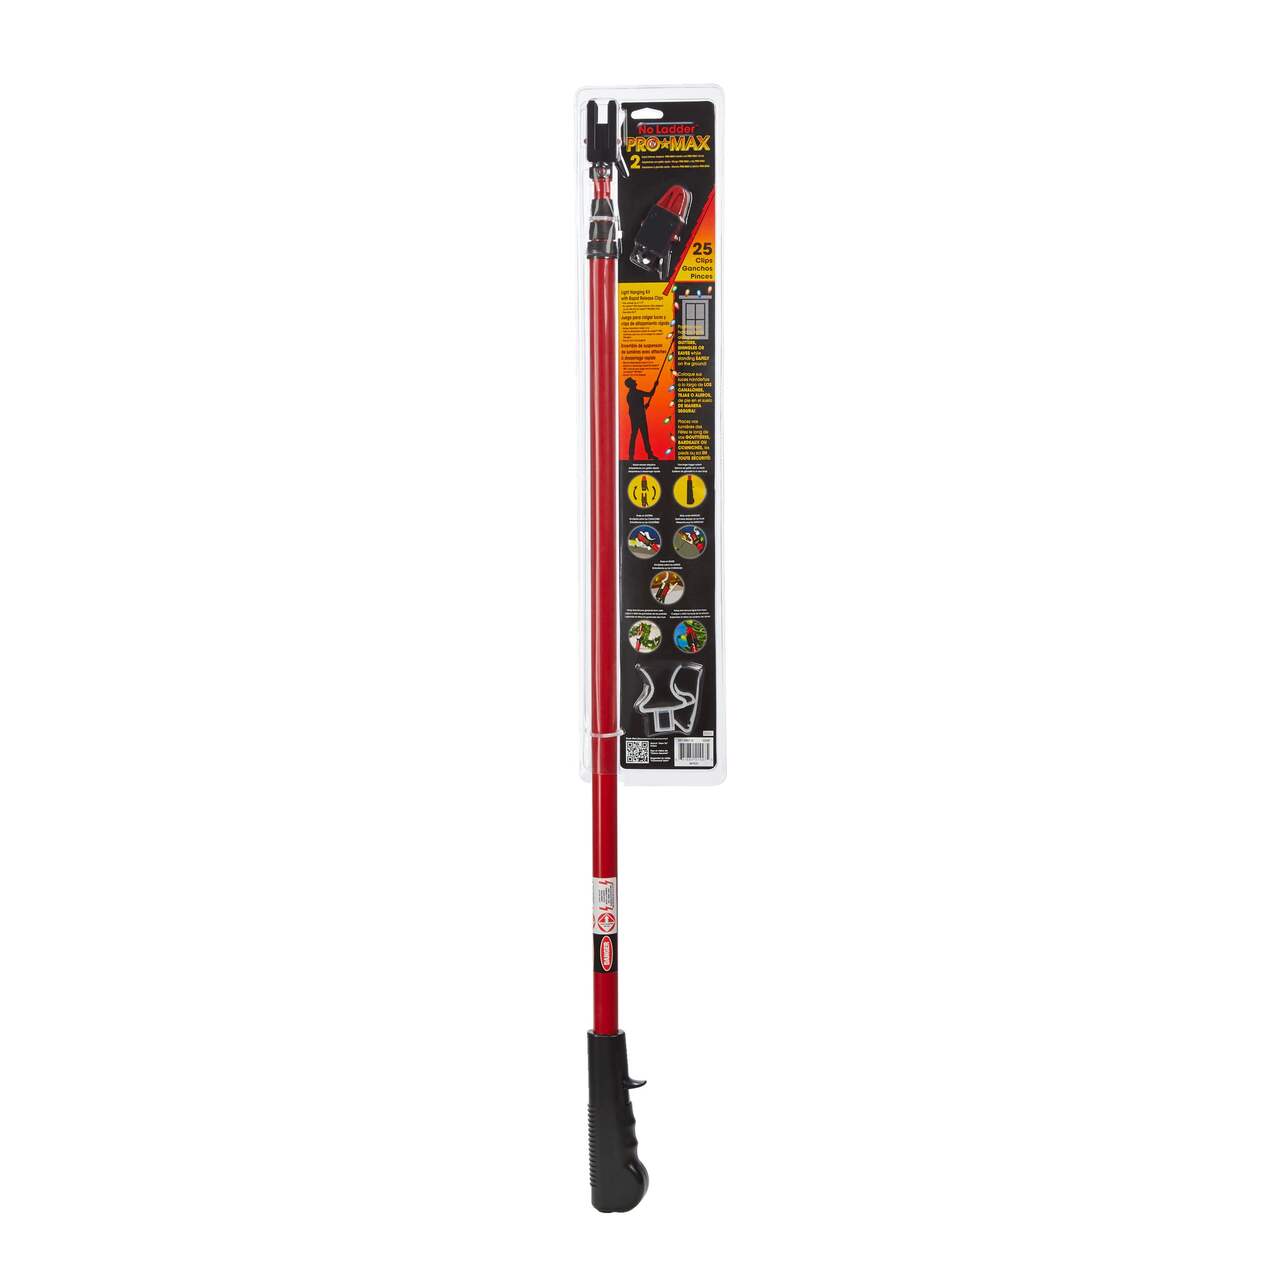  No Ladder PRO Telescoping Pole with 25 Rapid Release